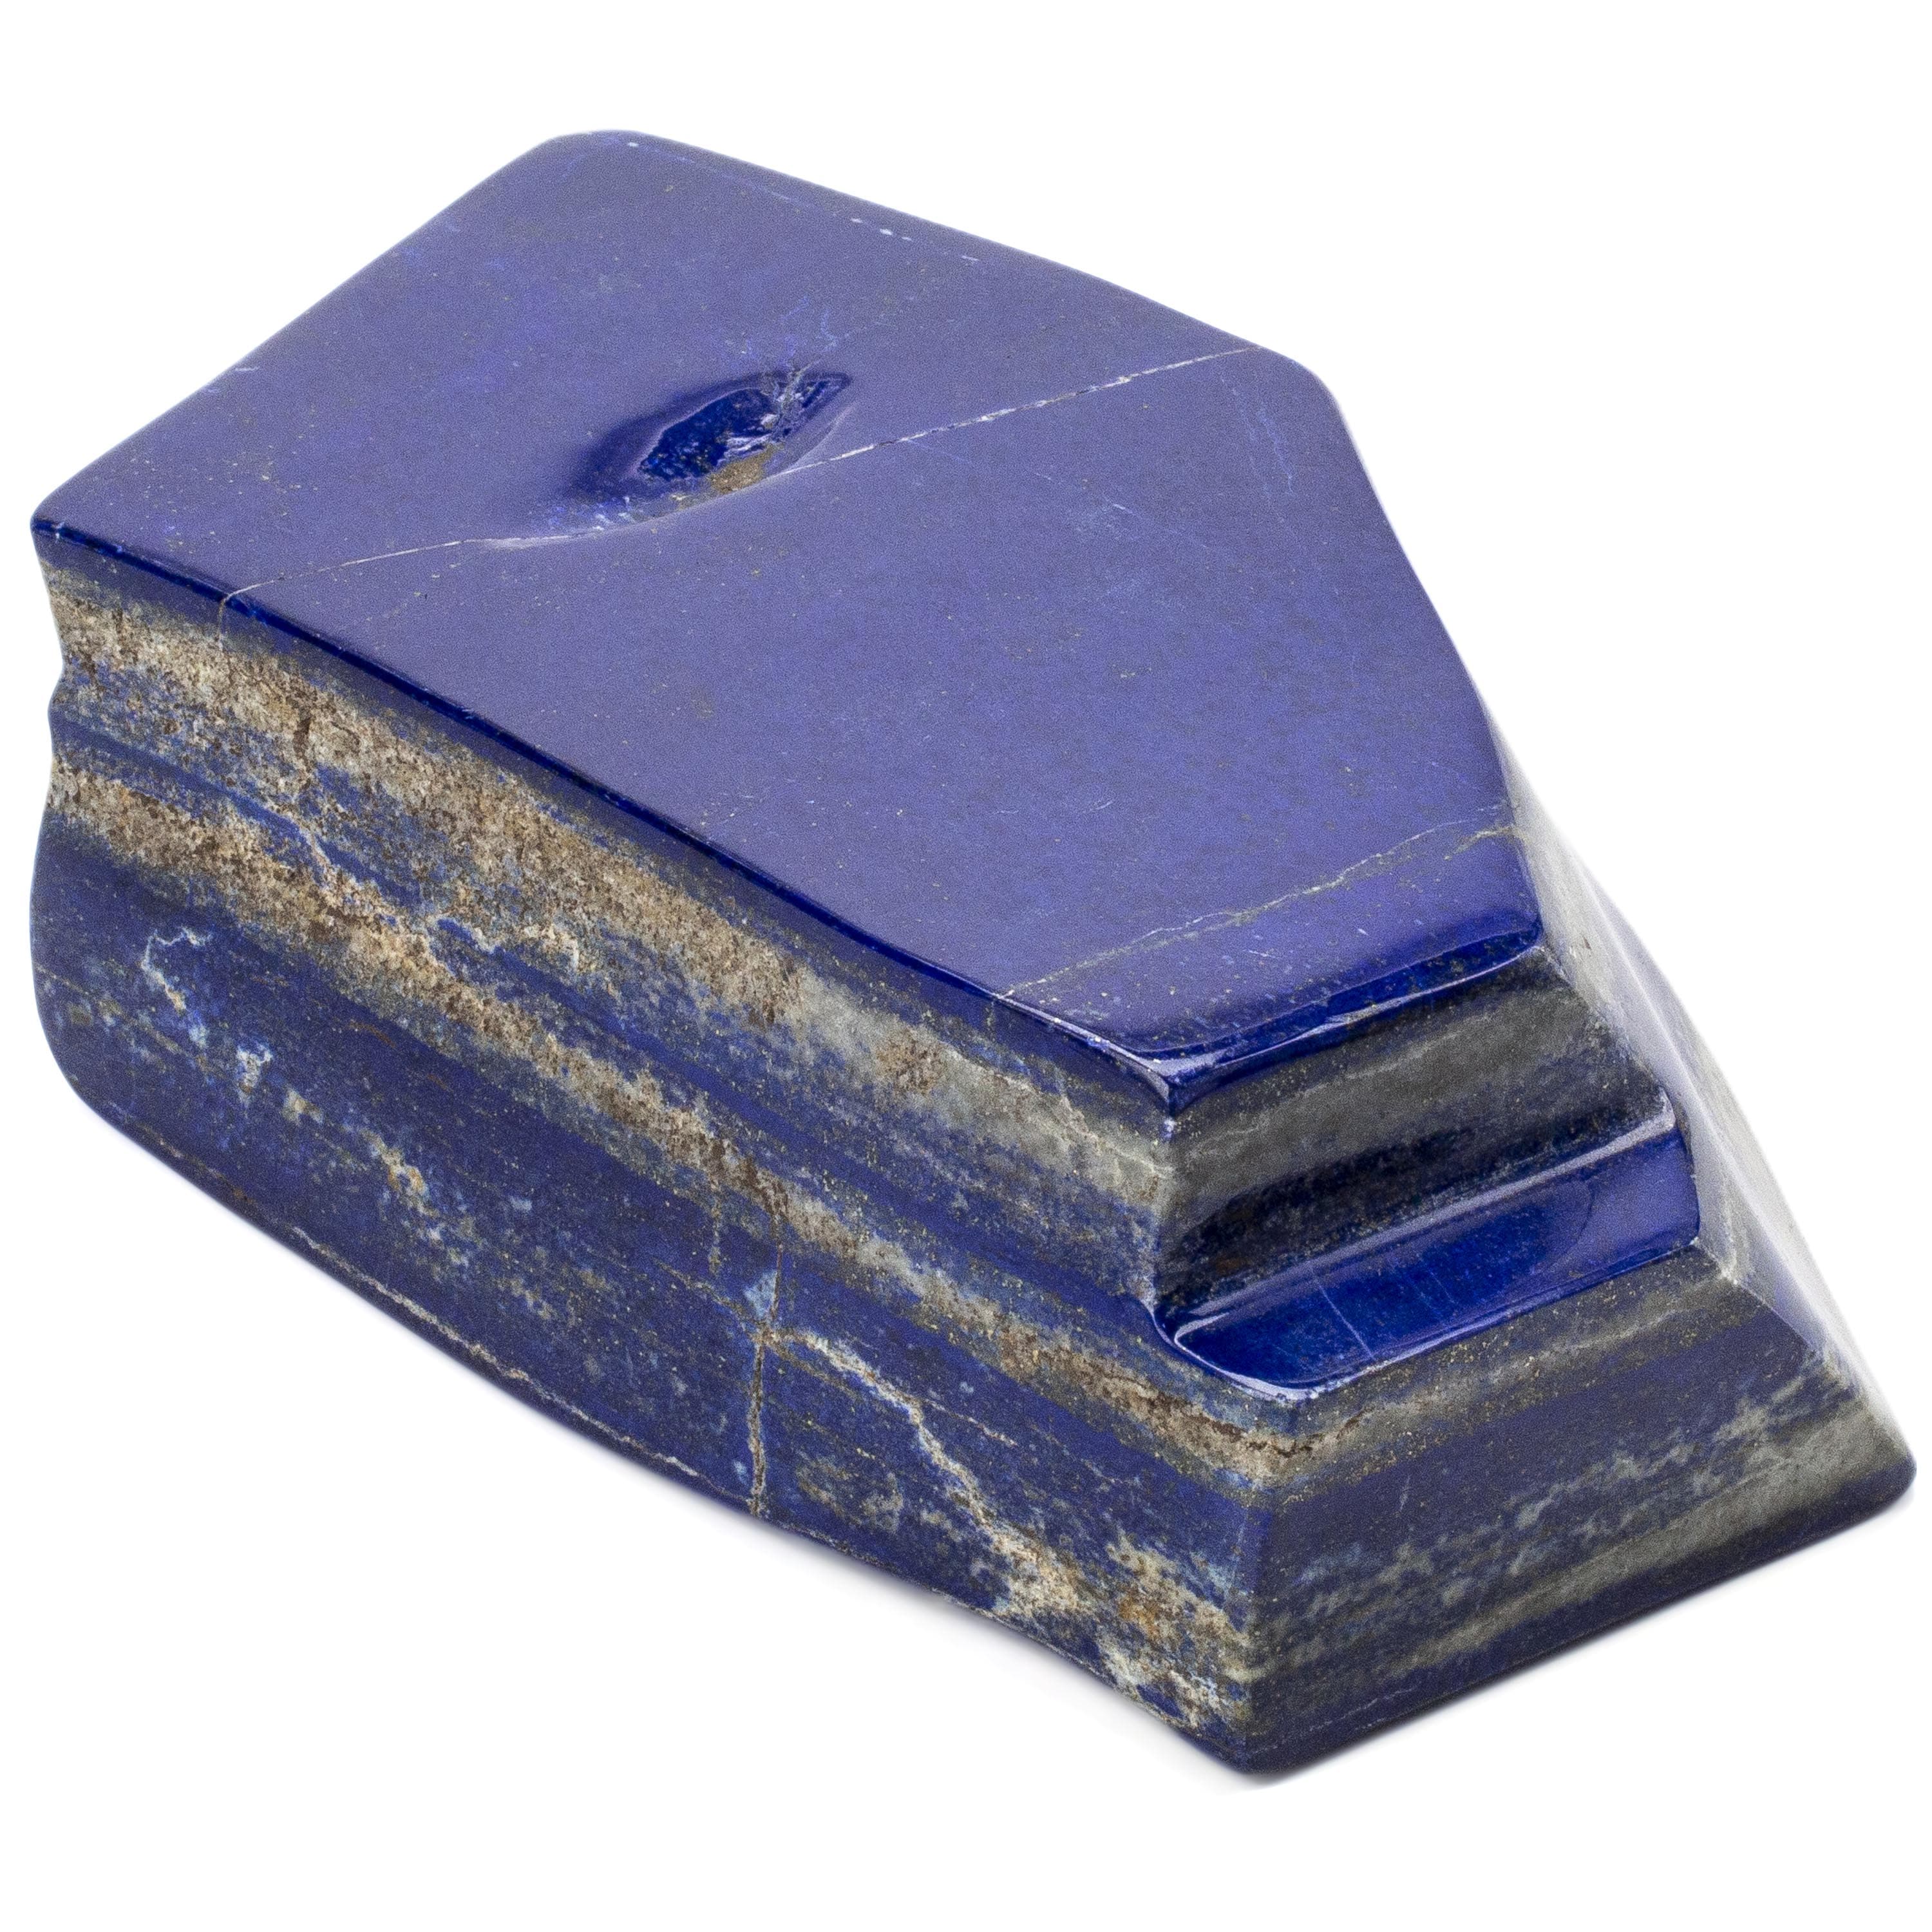 Kalifano Lapis Lapis Lazuil Freeform from Afghanistan - 2.4 kg / 5.2 lbs LP2500.001